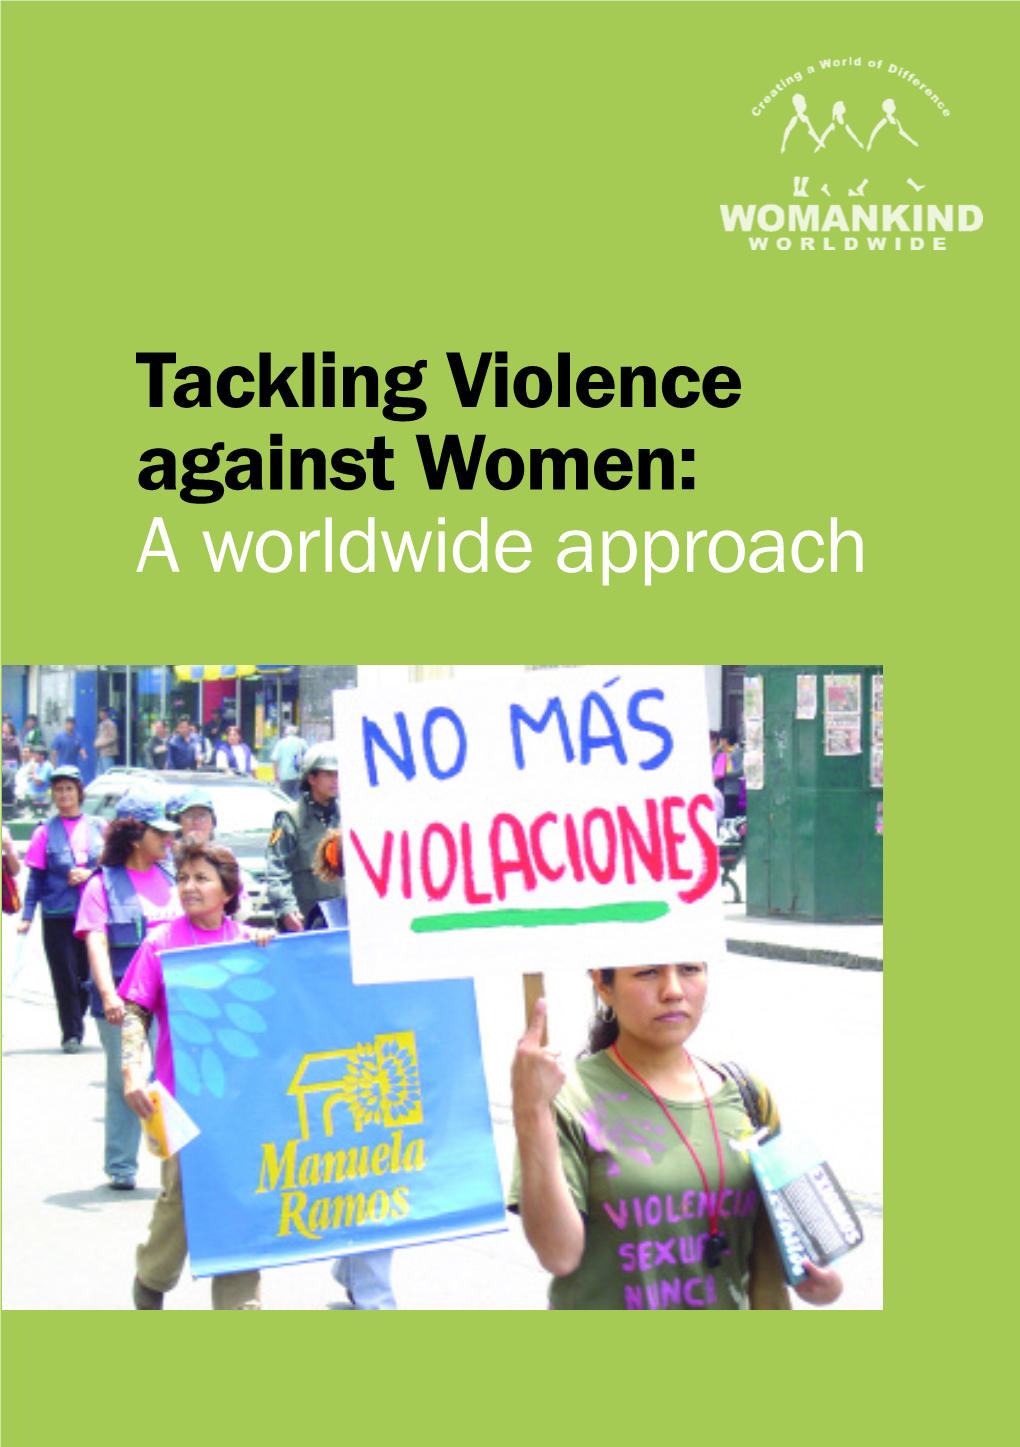 Tackling Violence Against Women: a Worldwide Approach Published by WOMANKIND Worldwide © WOMANKIND Worldwide 2007